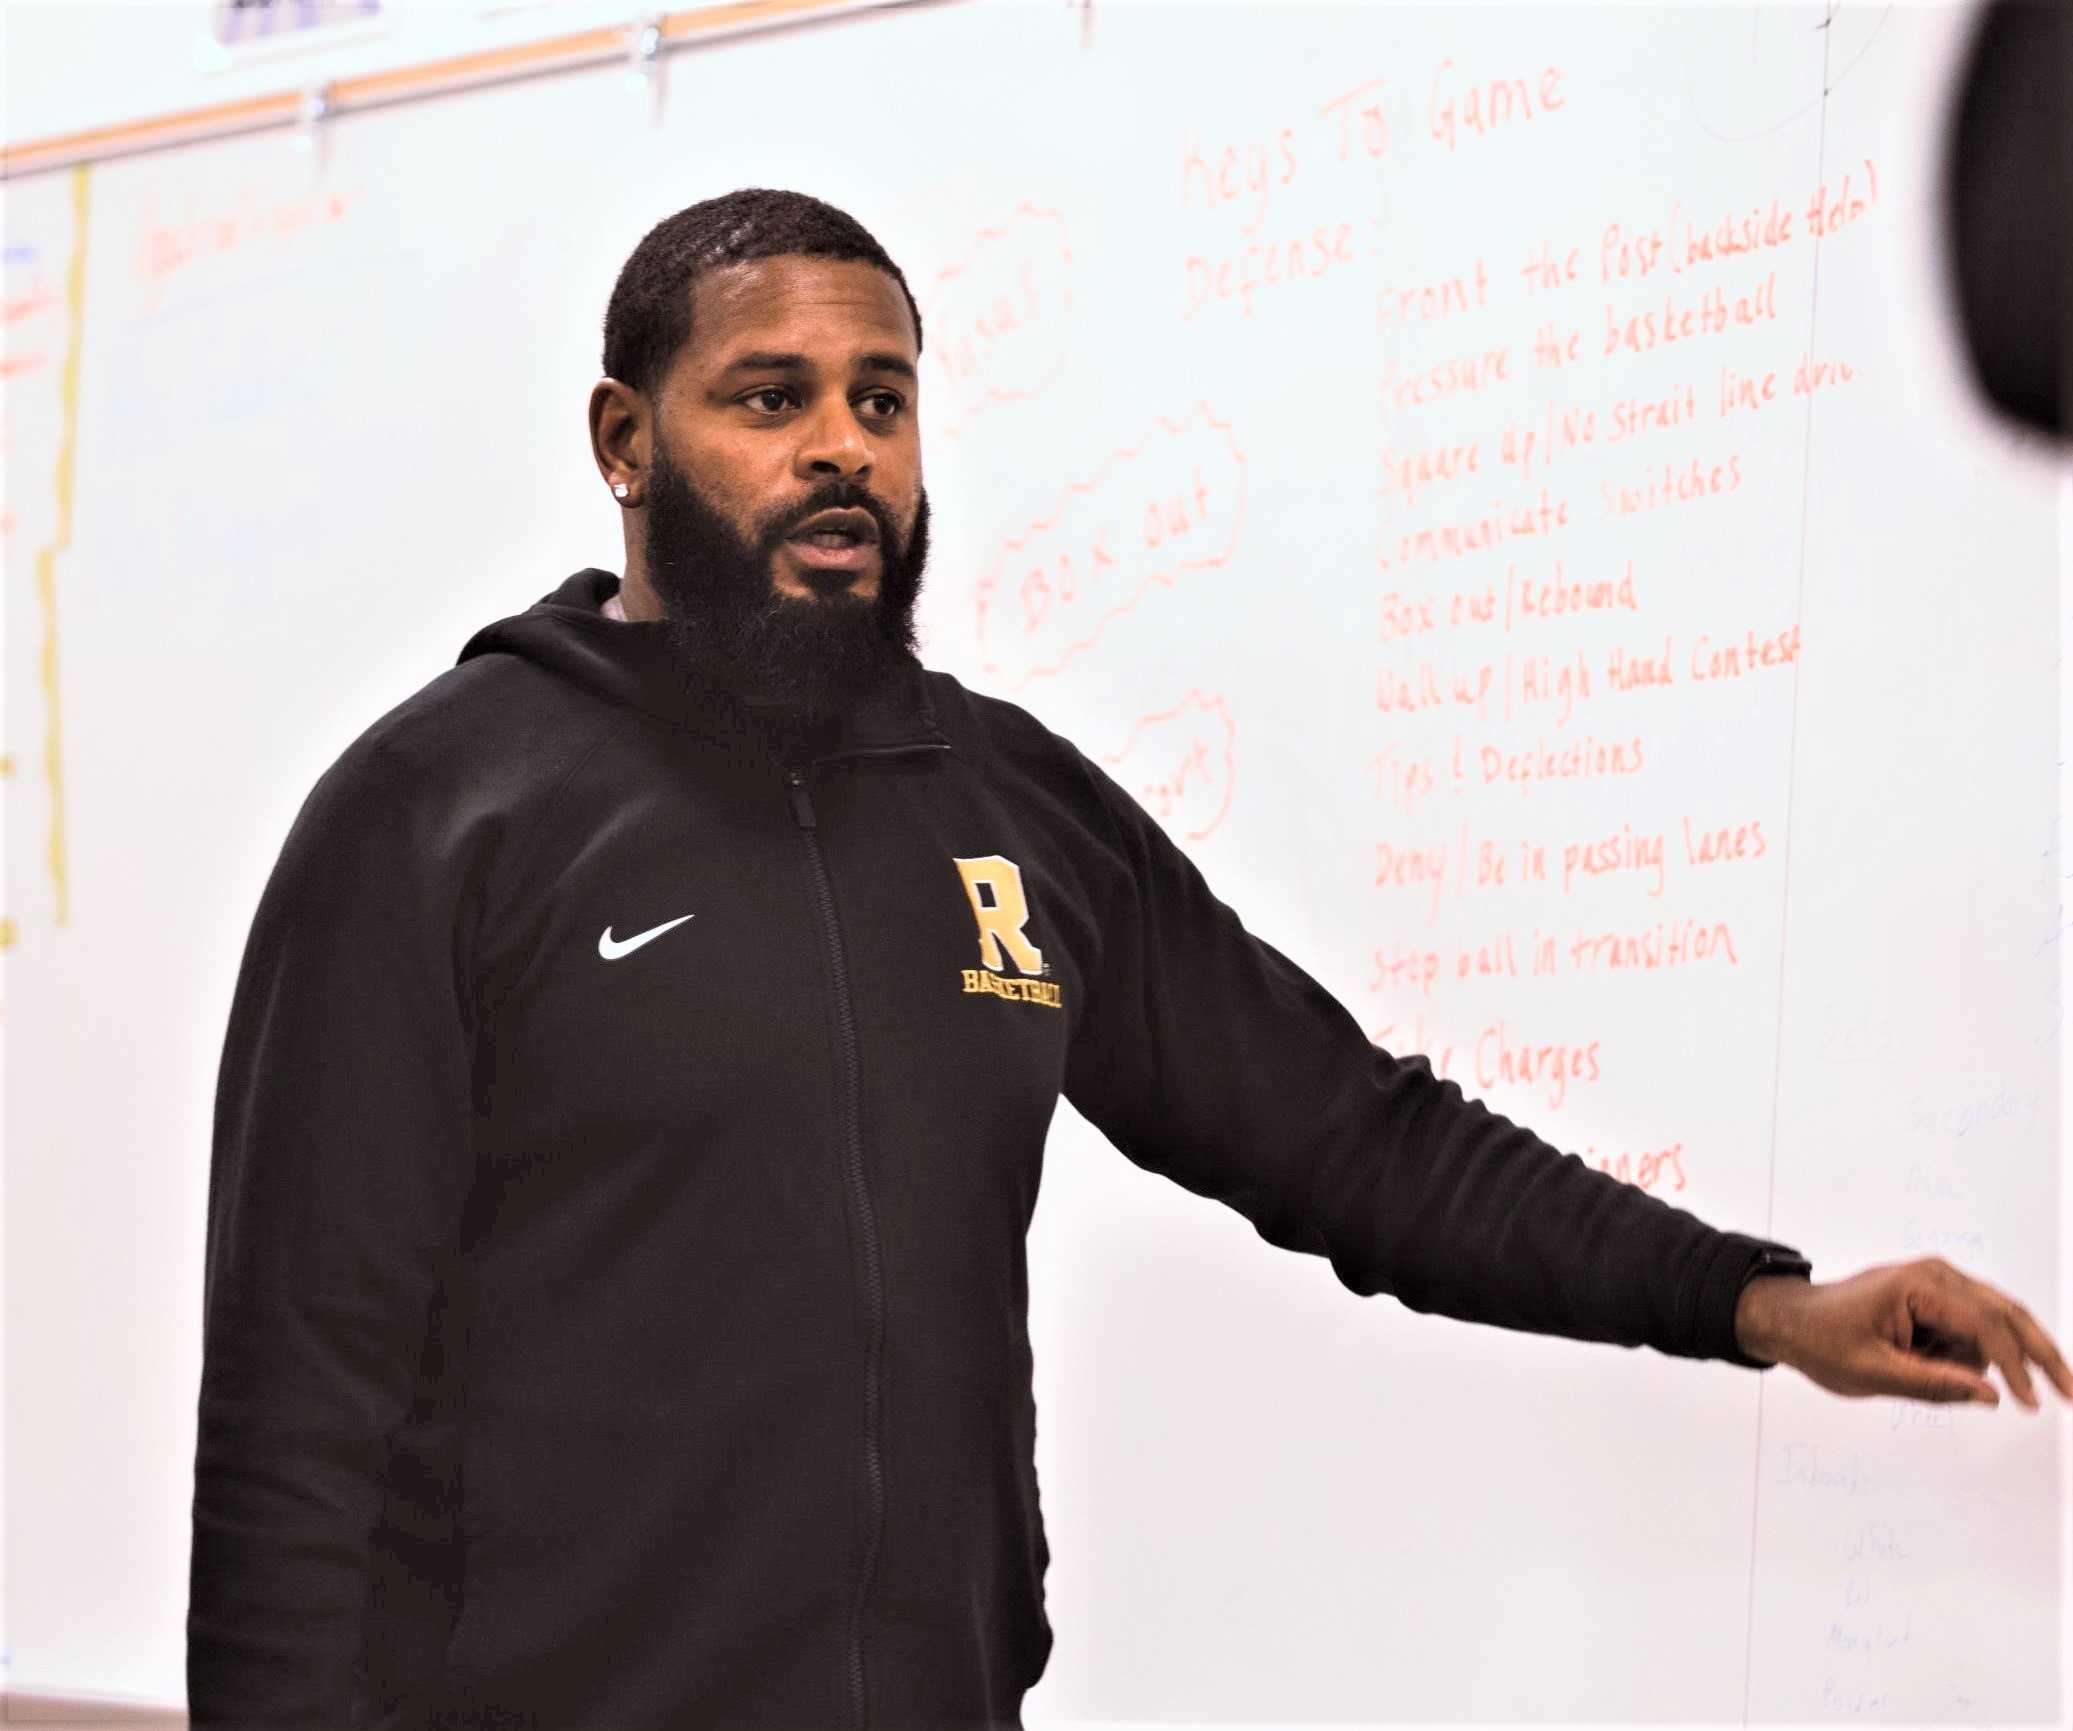 Jamarr Lawson, who started the Northwest Athletics AAU program, has assisted at Roosevelt for the past four seasons.